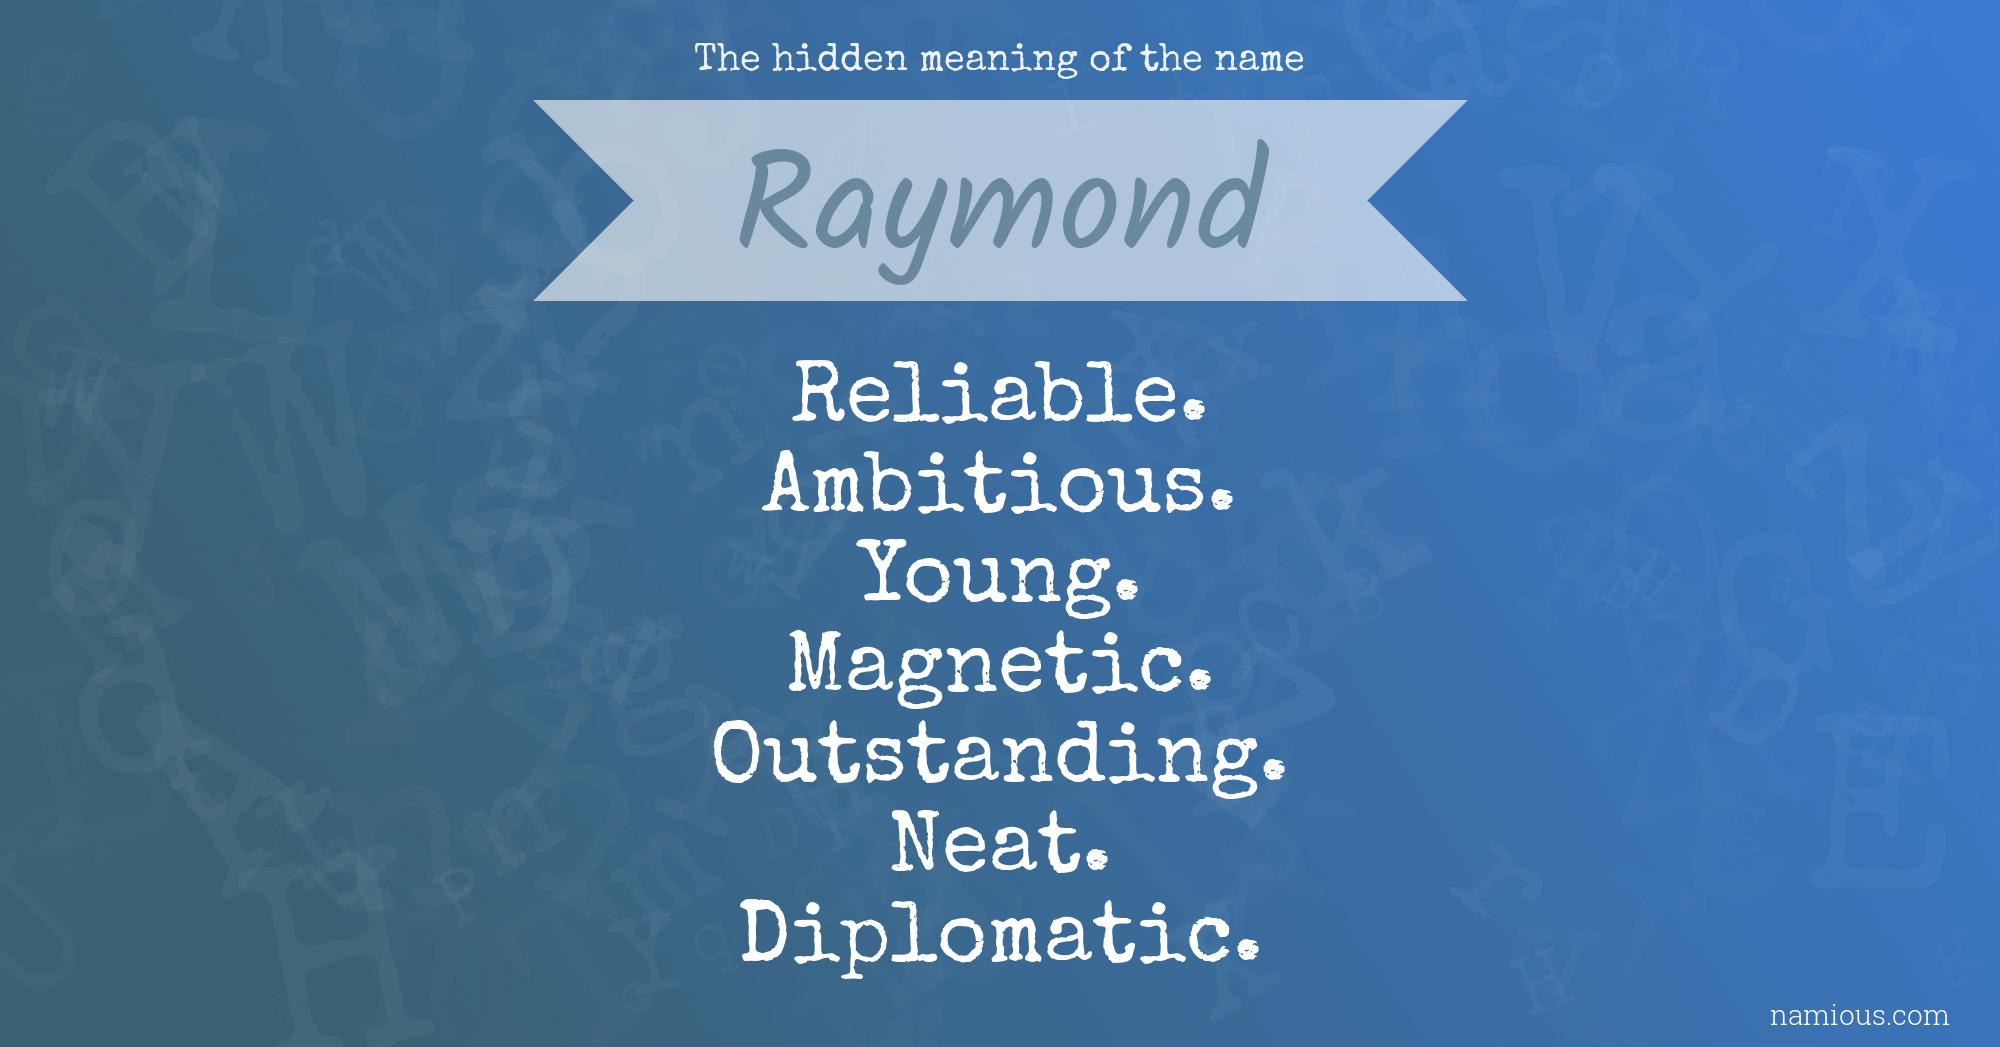 The hidden meaning of the name Raymond